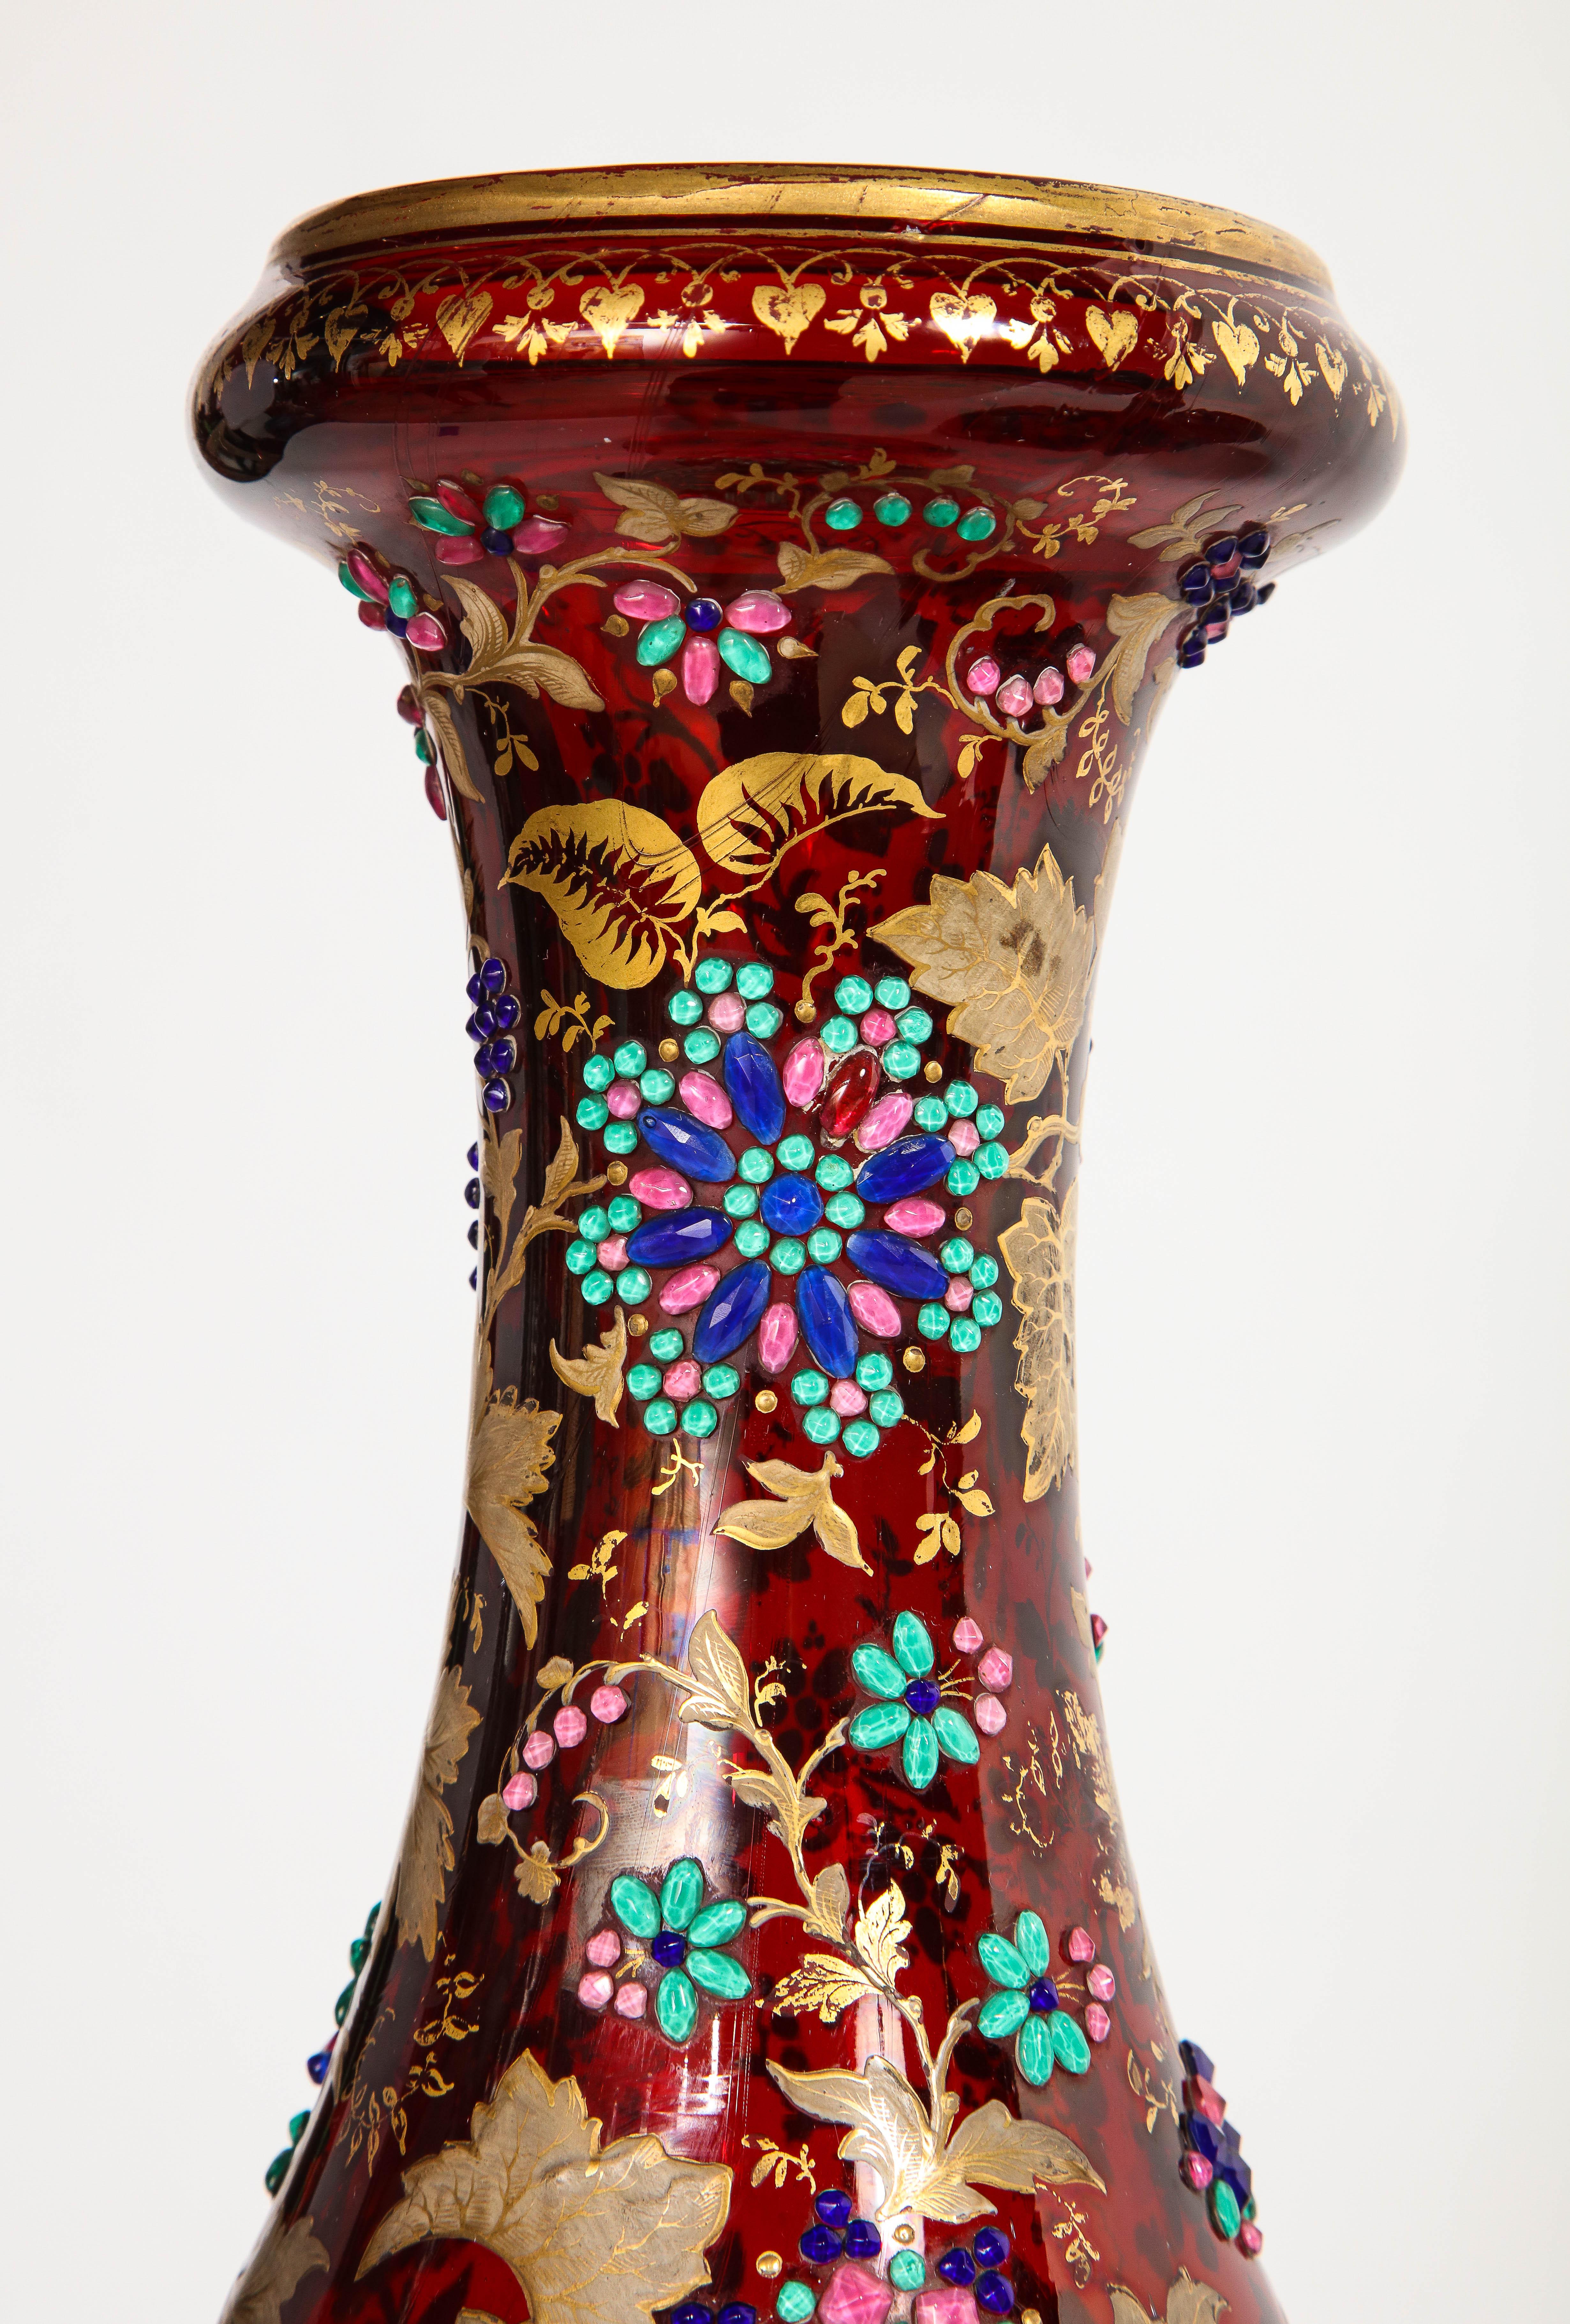 Czech Monumental Pr Moser jeweled Ruby-Red Overlay Two-Piece 24k Gold, Enameled Vases For Sale